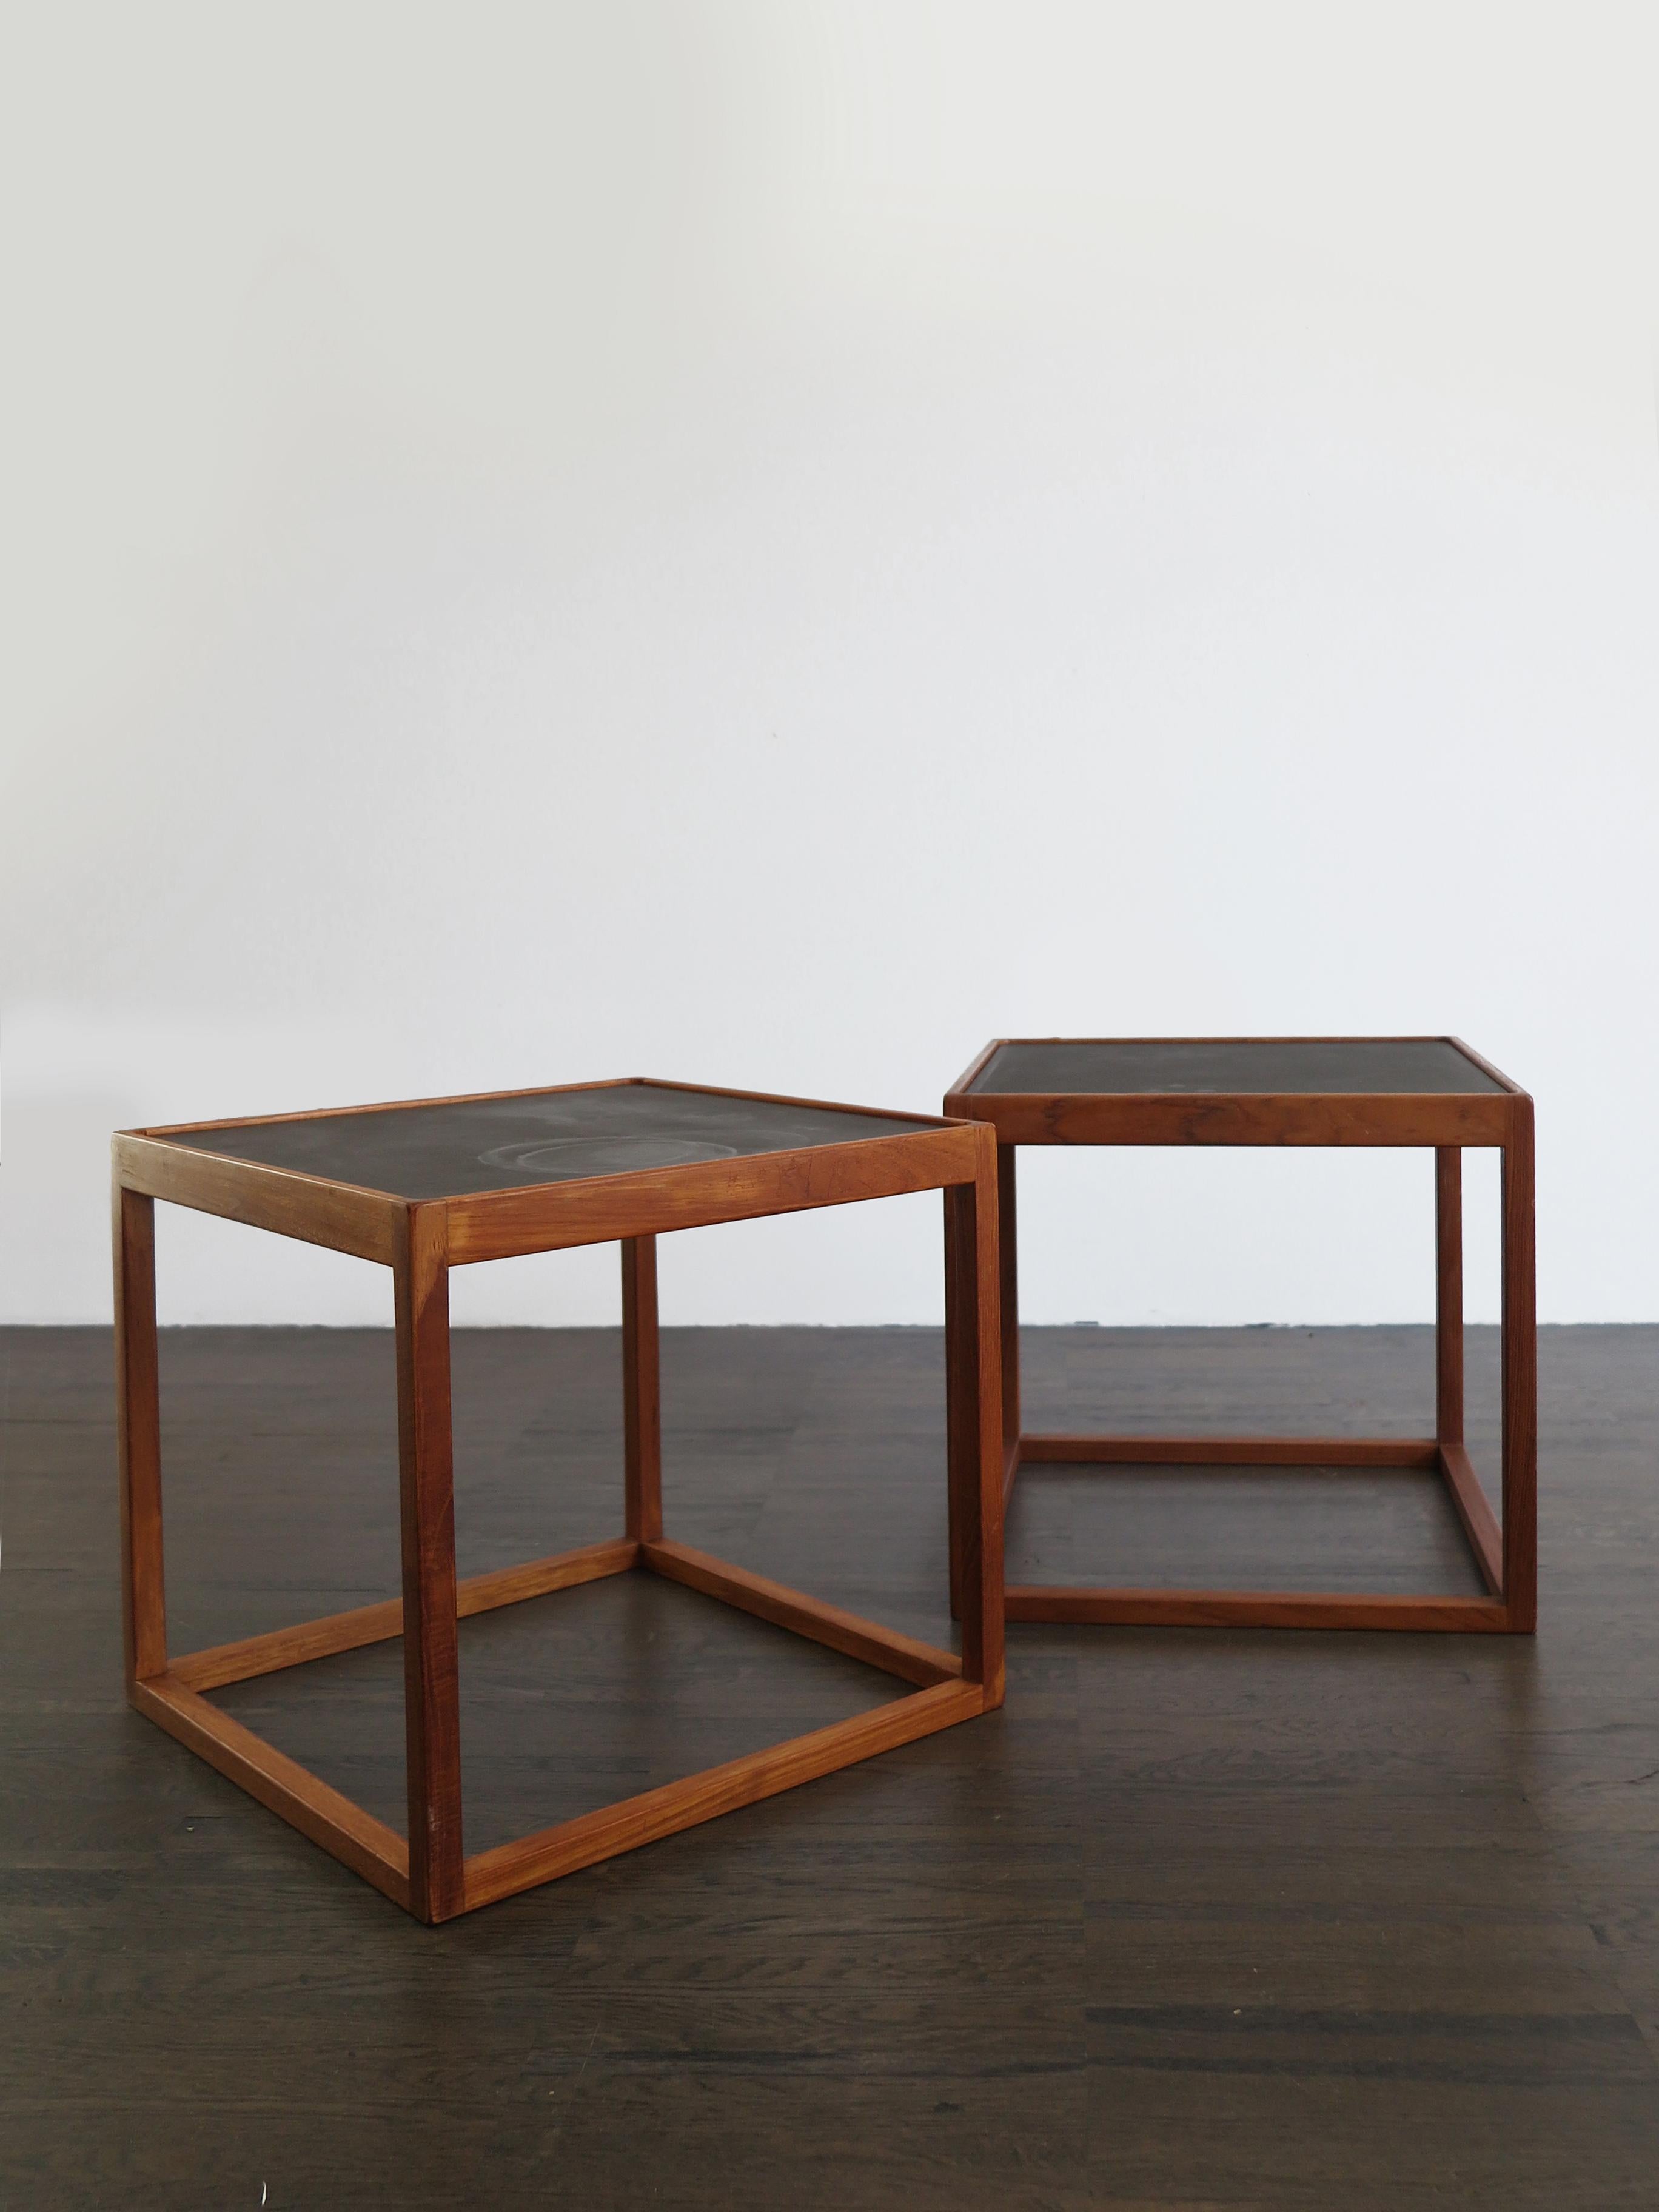 Scandinavian Mid-Century Modern design side tables or coffee table set designed by Kurt Østervig and produced by Jason Møbler with solid teak frame and double-sided tops in black laminate, Denmark 1960s.

Please note that the tables are original